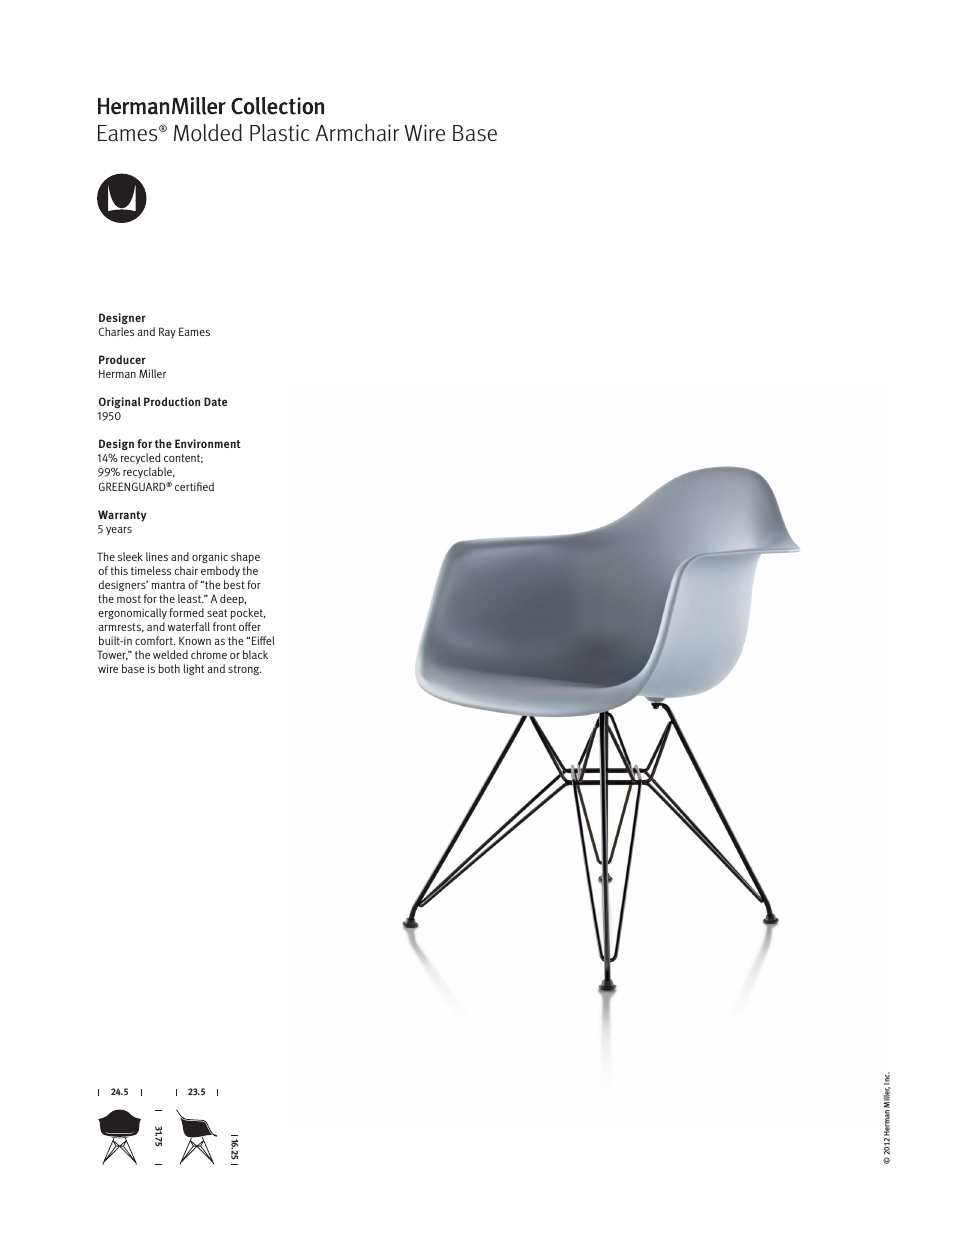 Eames Molded Plastic Armchair Wire Base - Product sheet